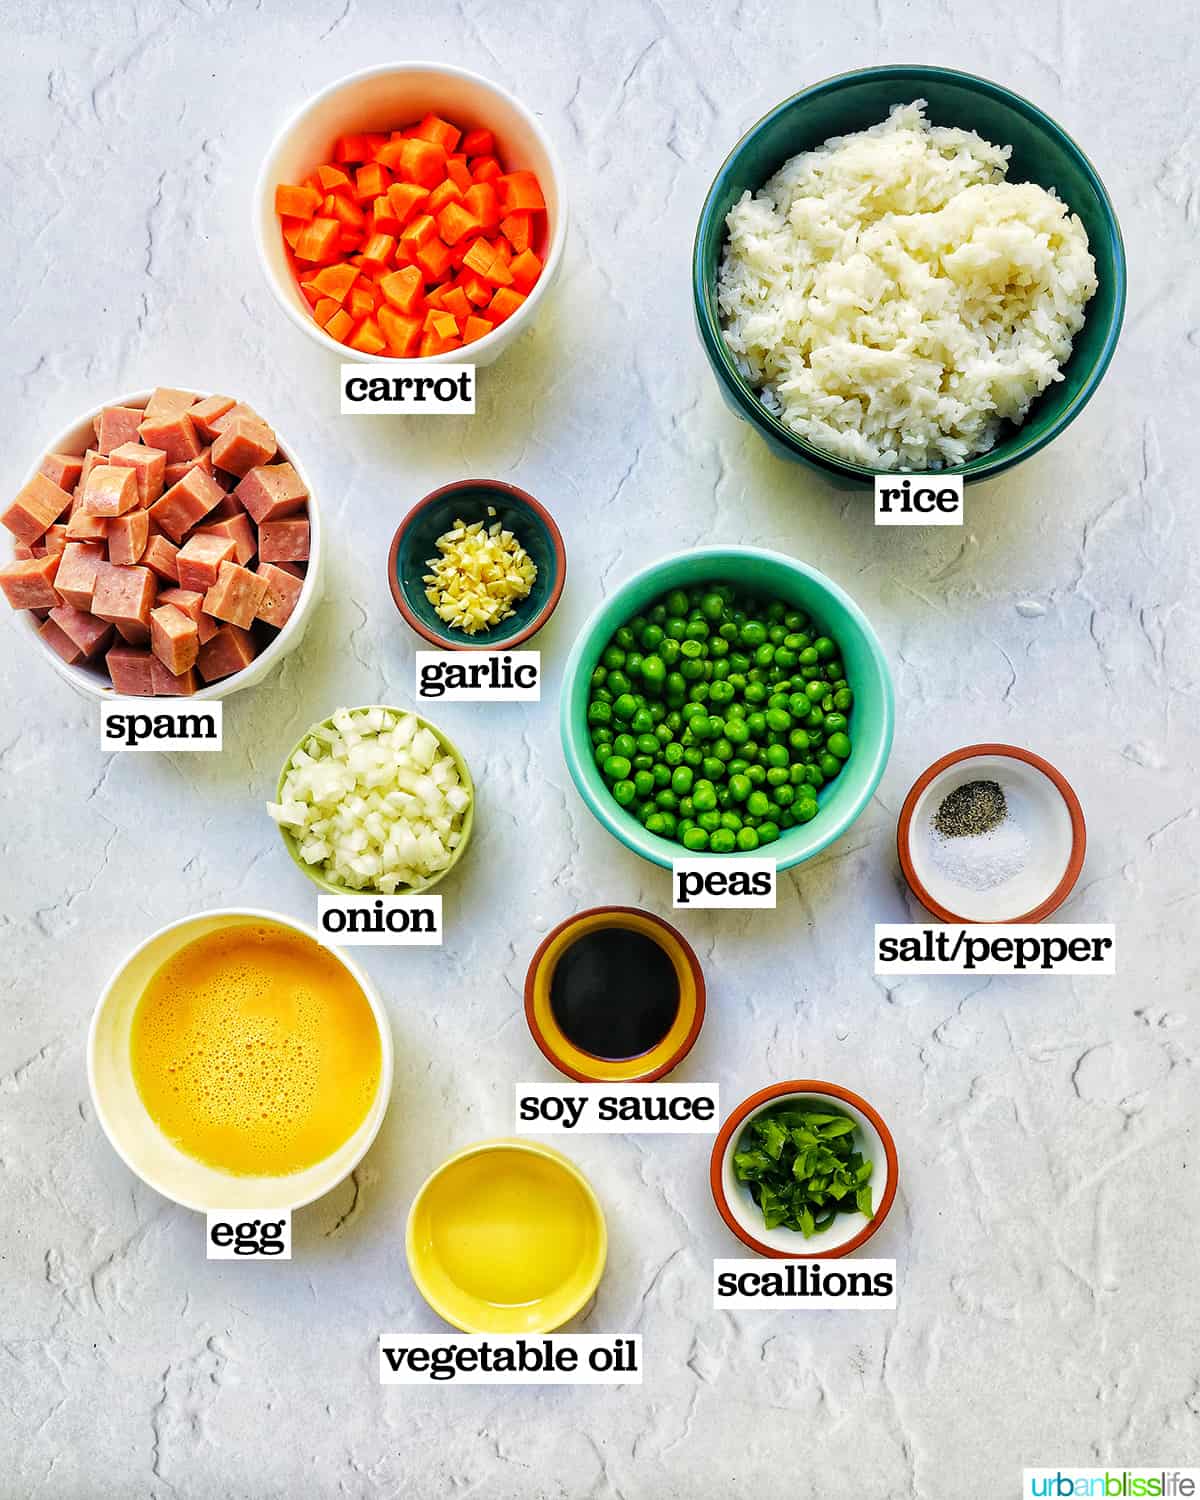 bowls of ingredients to make spam fried rice.